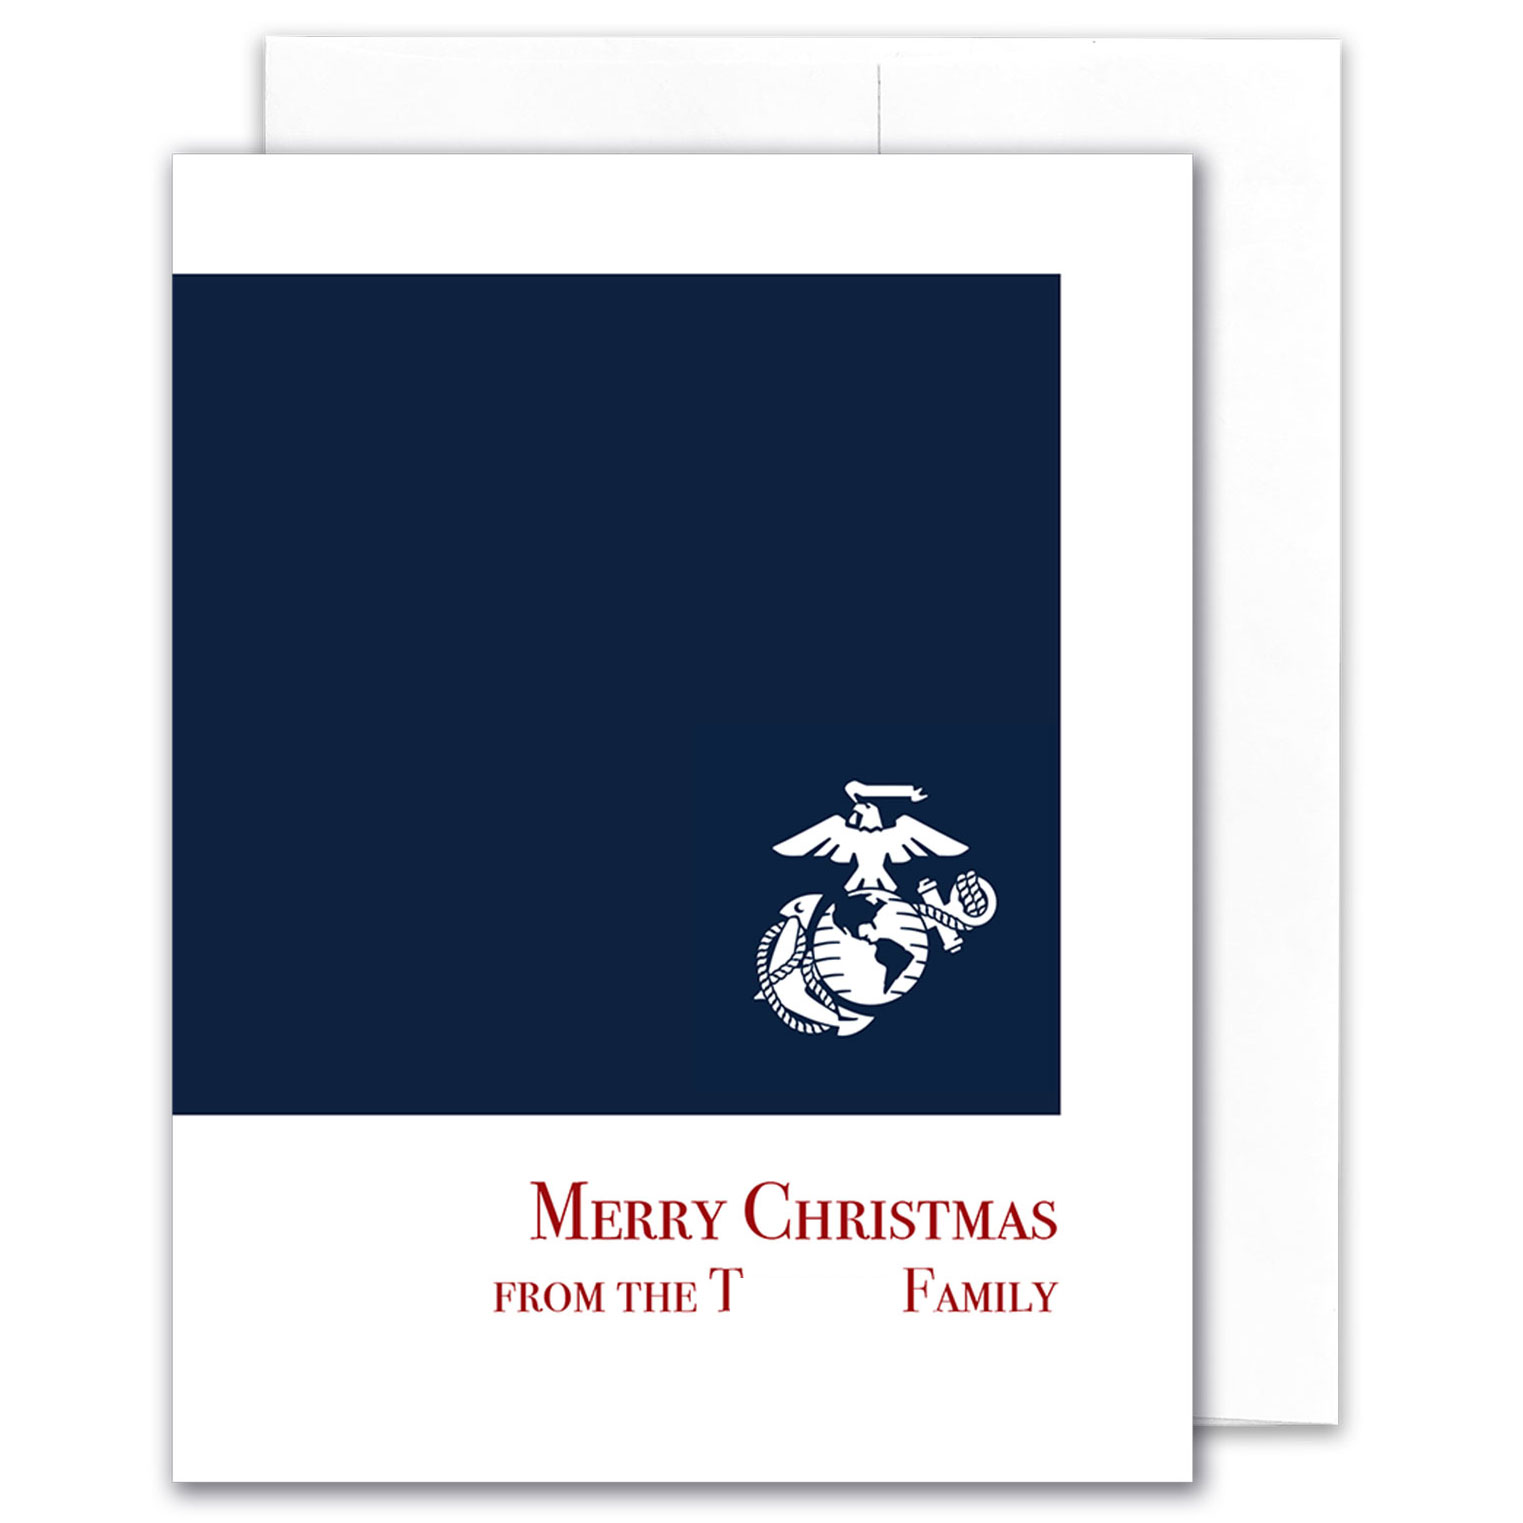 2MyHero personalized custom note card for a USMC family Christmas card.